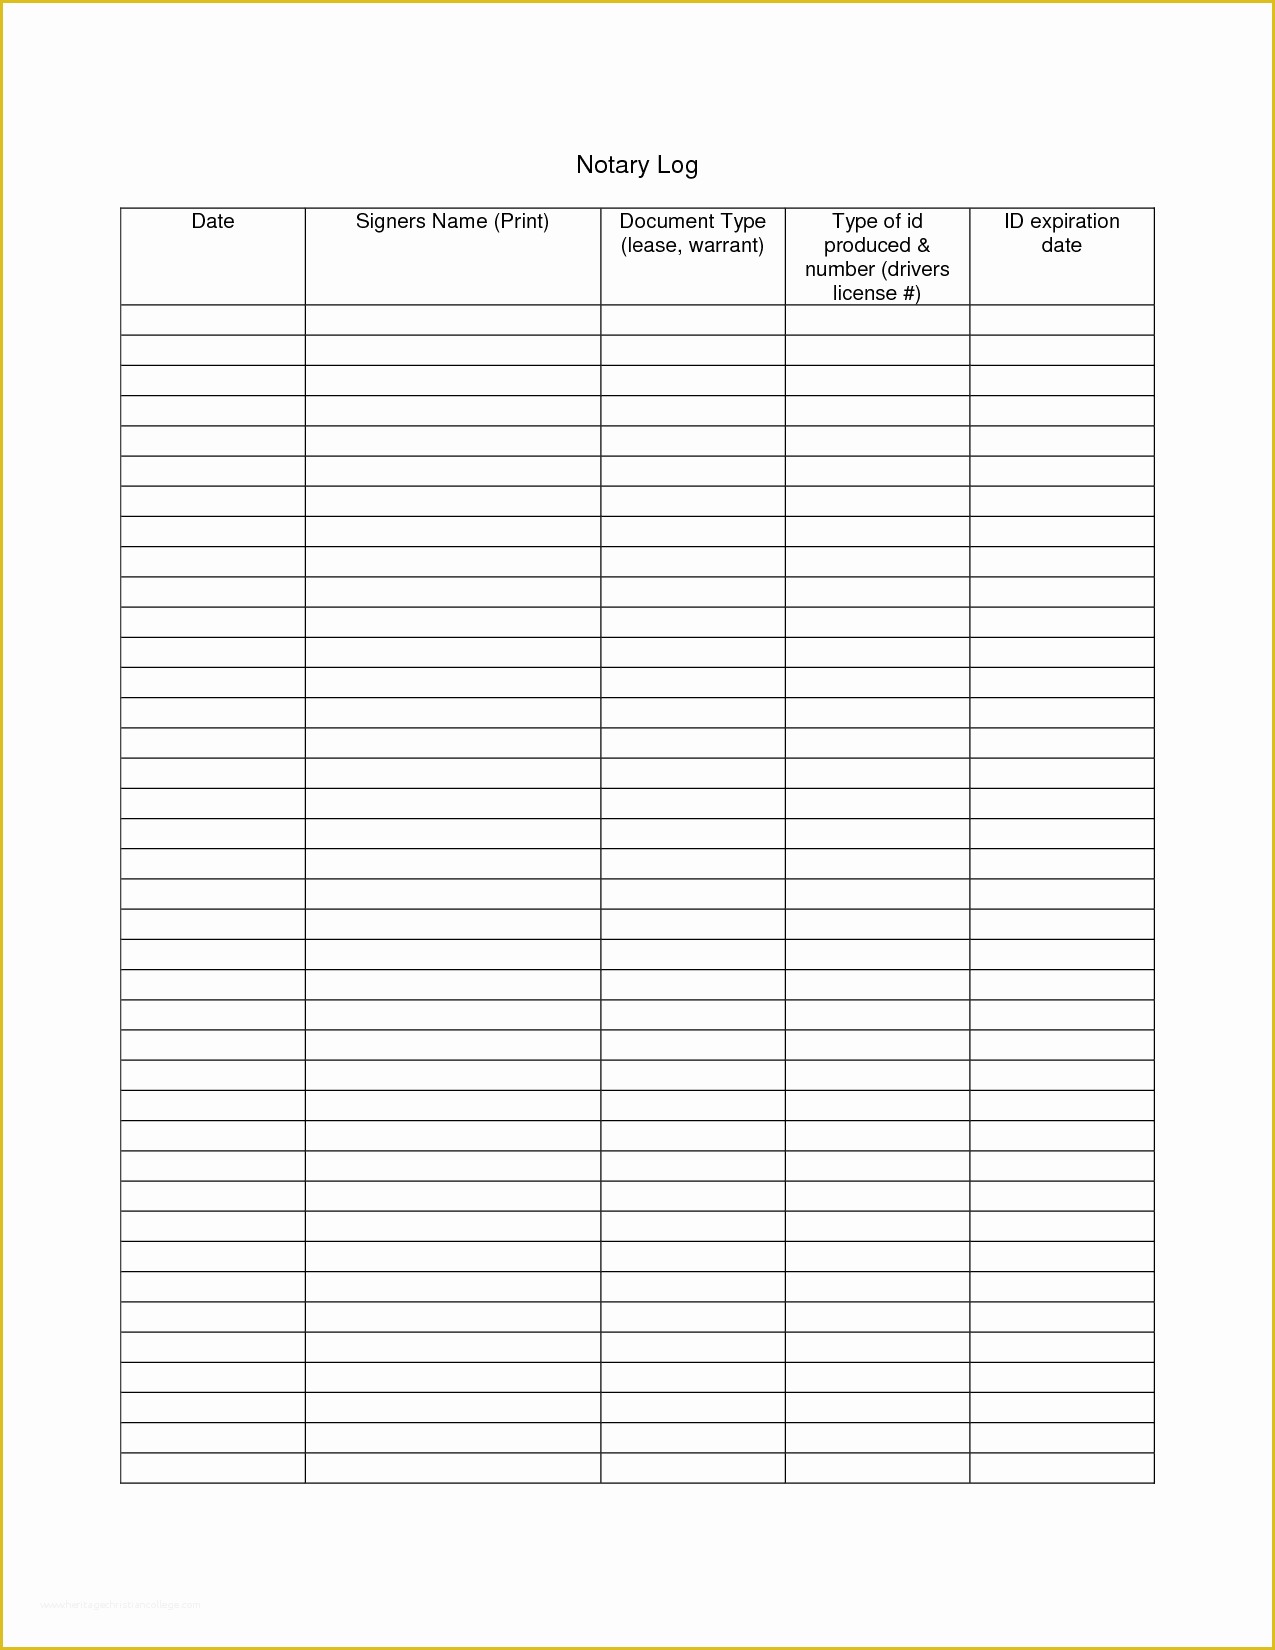 Notary Public Journal Template Free Of 22 Of Notary Public Record Sheet Template